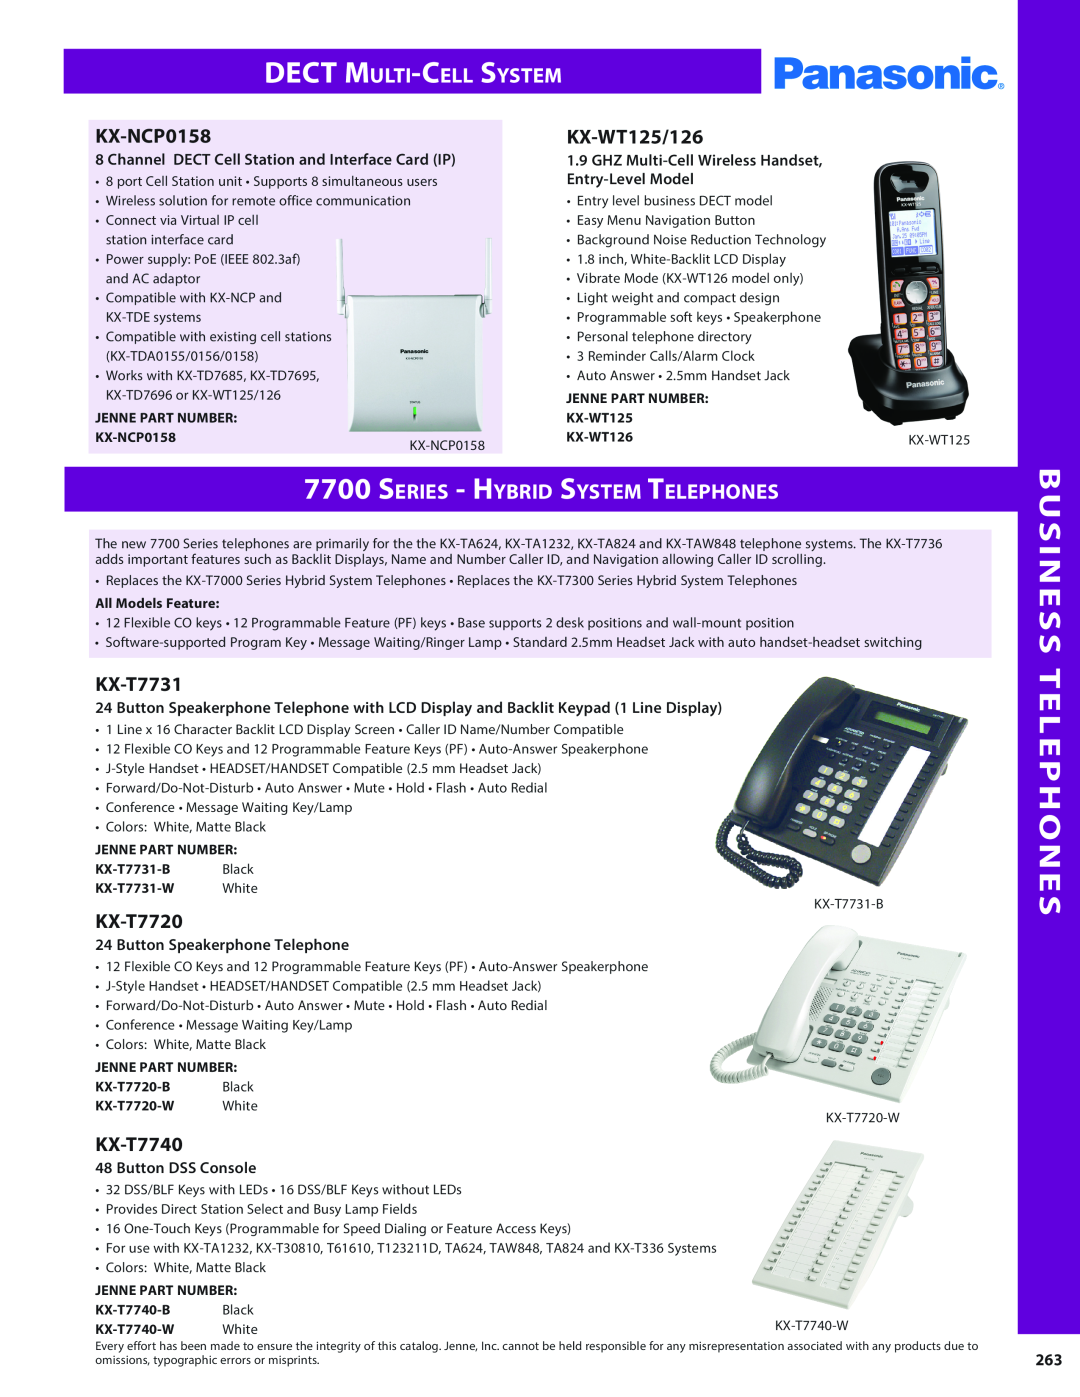 Panasonic PMPU2000 Business, DECT Multi-Cell System, Series - Hybrid System Telephones, GHZ Multi-CellWireless Handset 